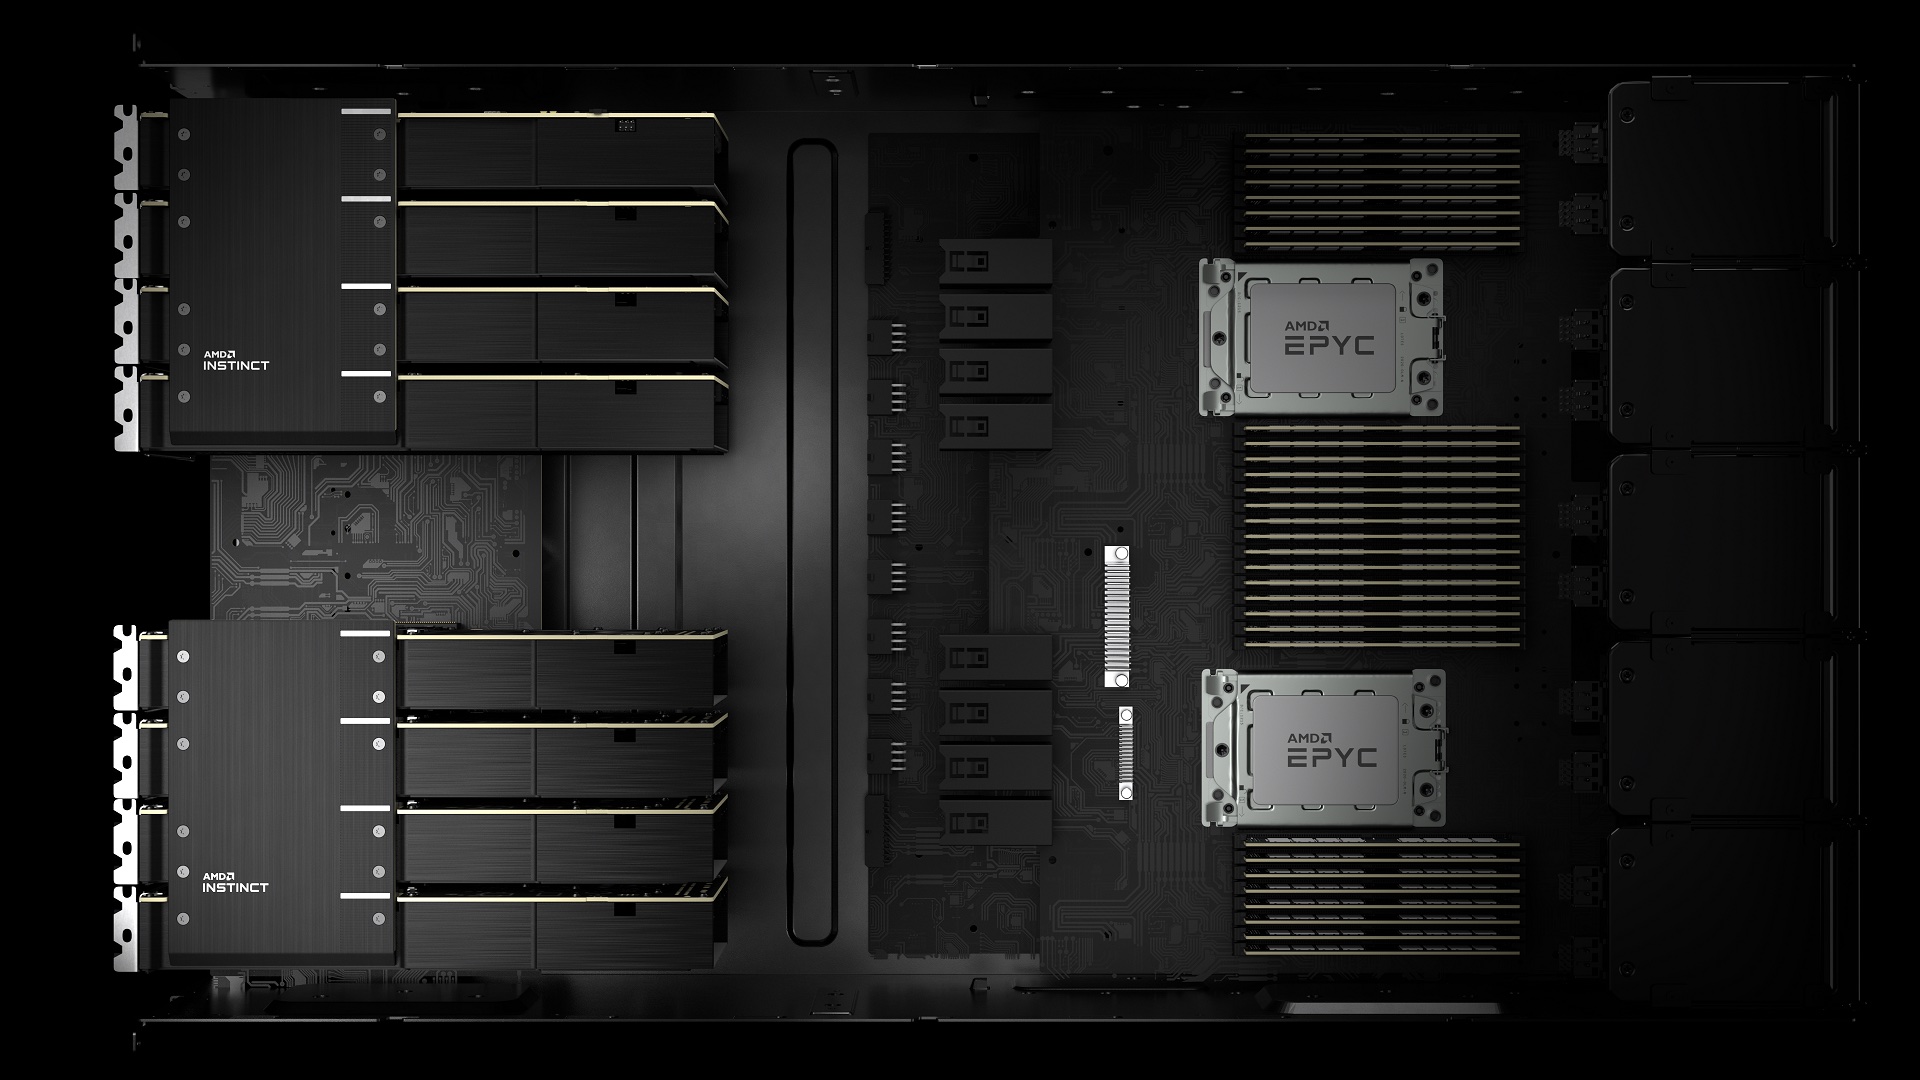 AMD and HPE unveil support of Adastra supercomputer